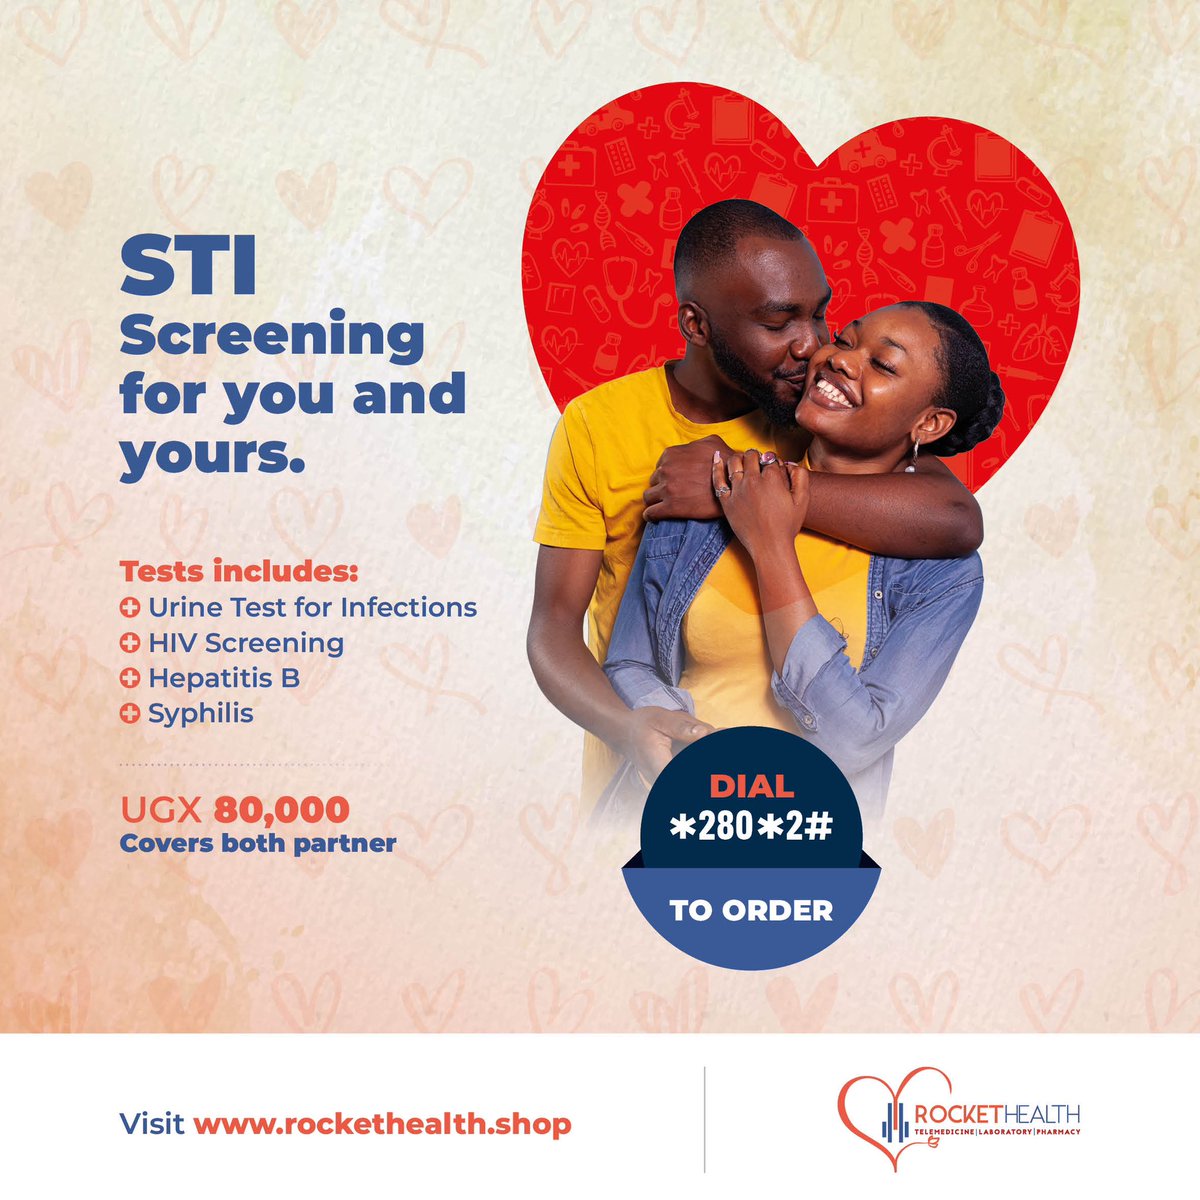 Testing together - Now that’s being intentional ❤️ Dial *280*2# or click bit.ly/RHWhatsApp to order the STI screening package for you & bae.